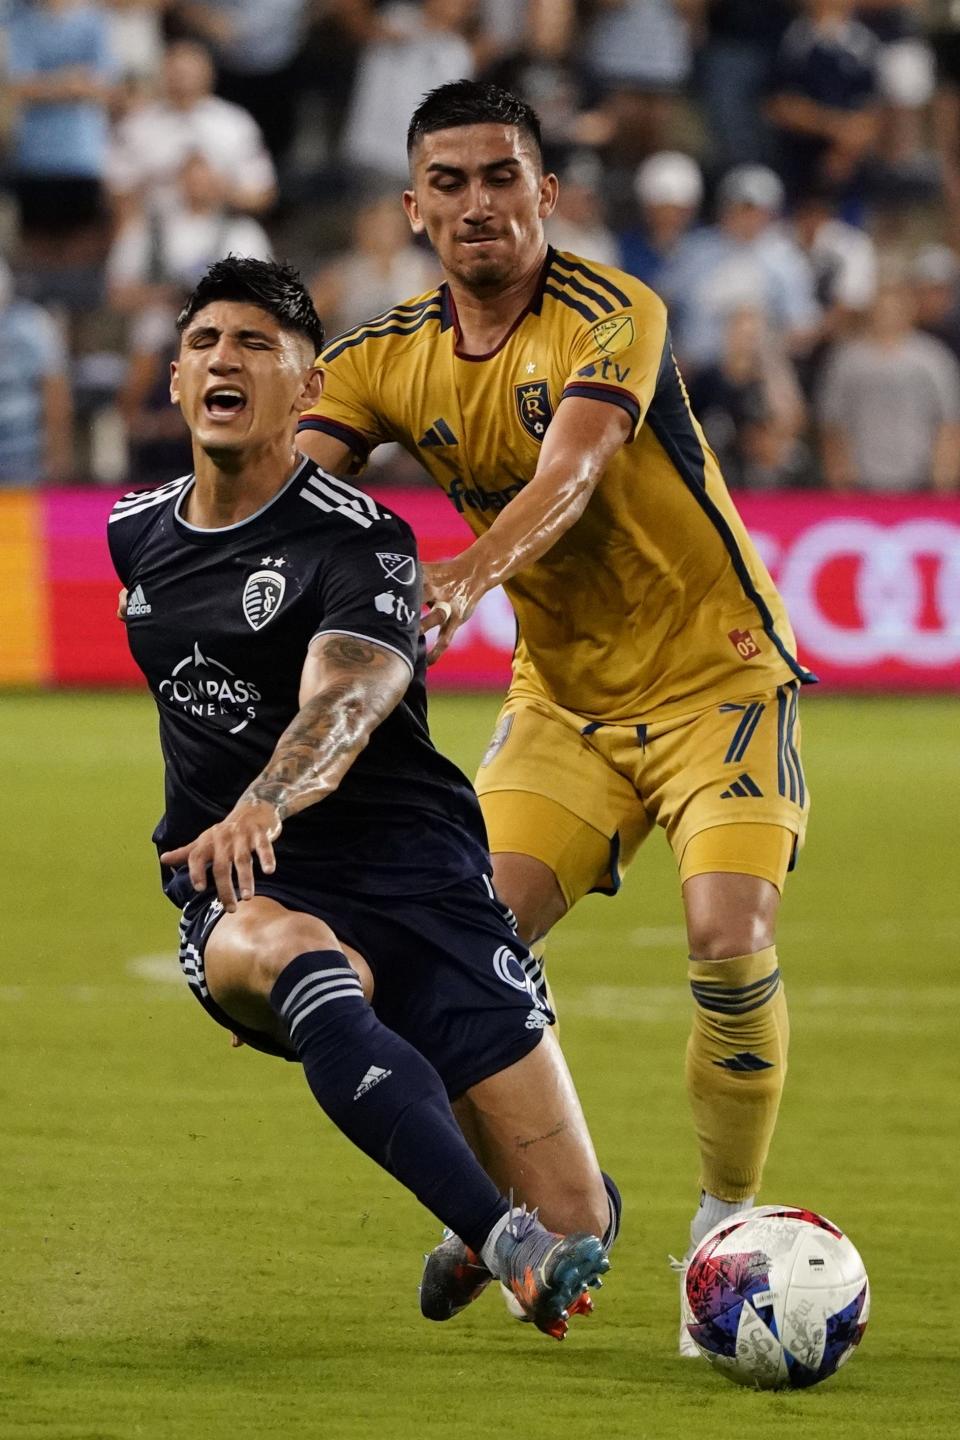 Real Salt Lake's Pablo Ruiz (7) and Sporting Kansas City's Alan Pulido fight for the ball during the second half on July 12. Pulido leads SKC with 10 goals and three assists.